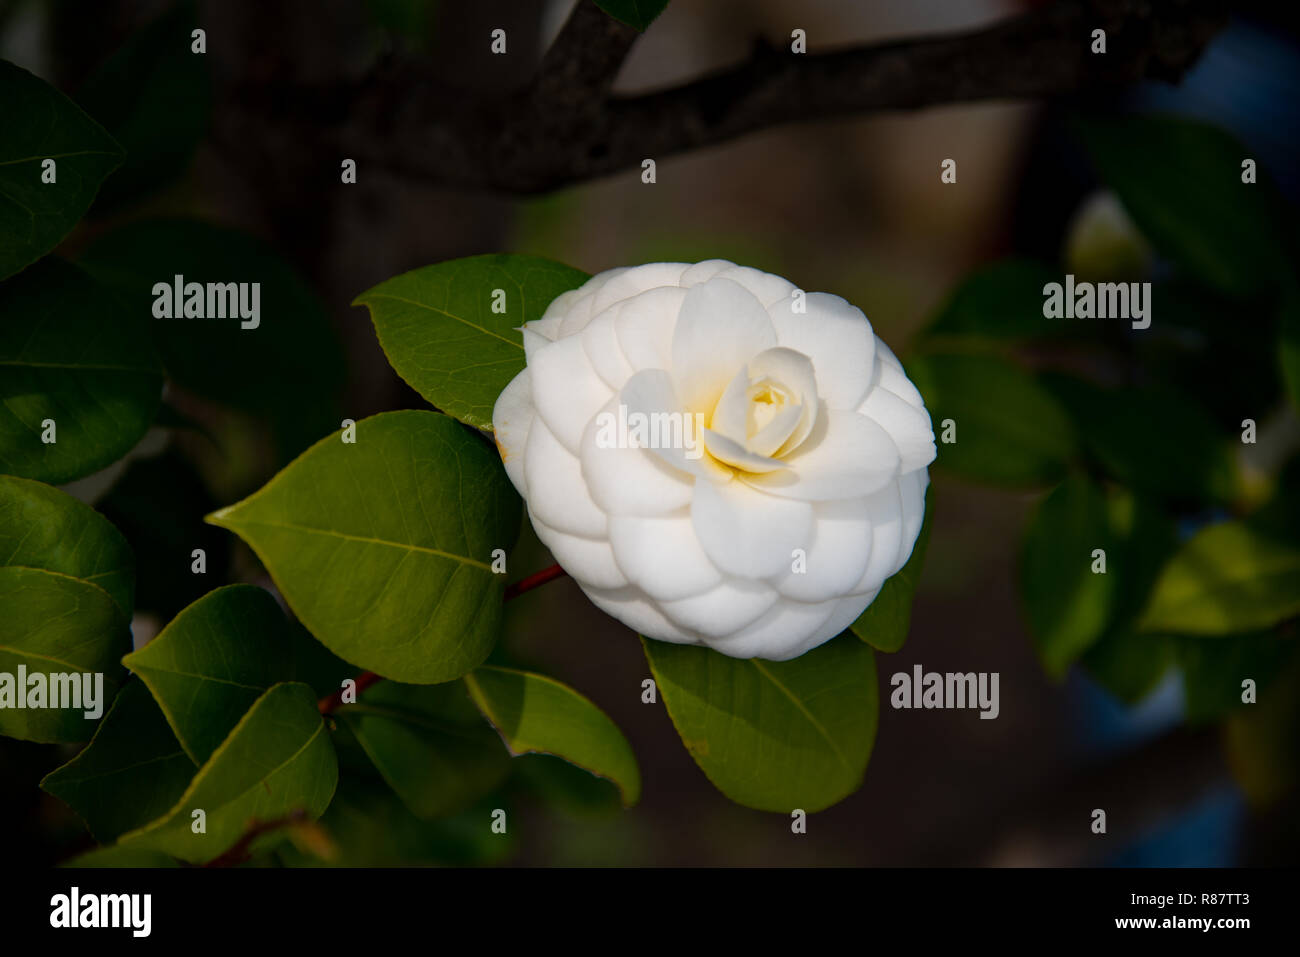 Closeup of Camellia Japonica flower (tea flower, tsubaki) in white petal with yellow stamens during Springtime. Stock Photo